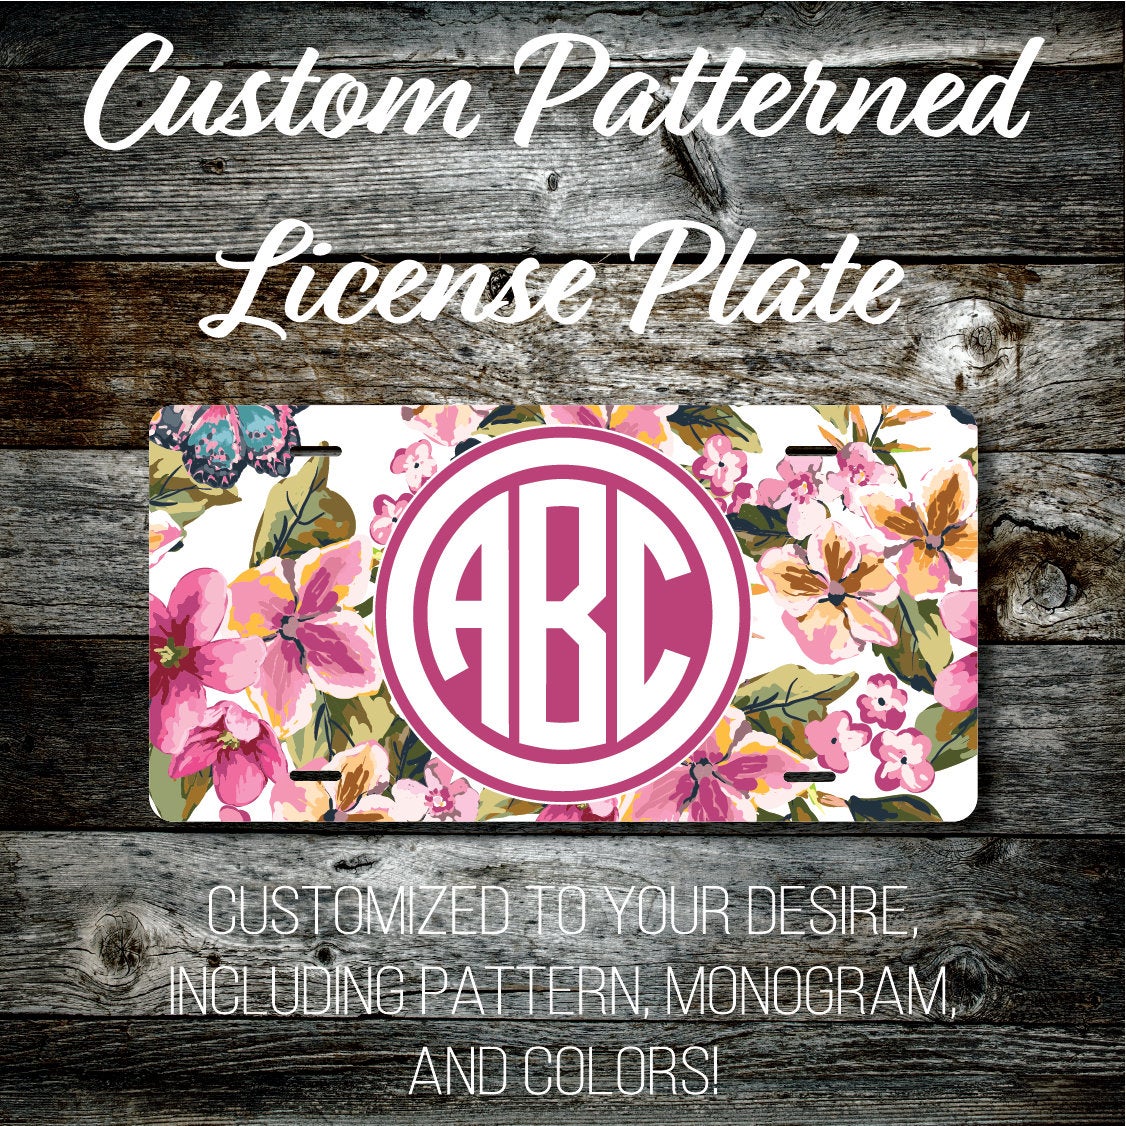 Personalized Monogrammed Custom License Plate (Pattern #270), Car Tag, Vanity license plate, Floral & Stripes Watercolor